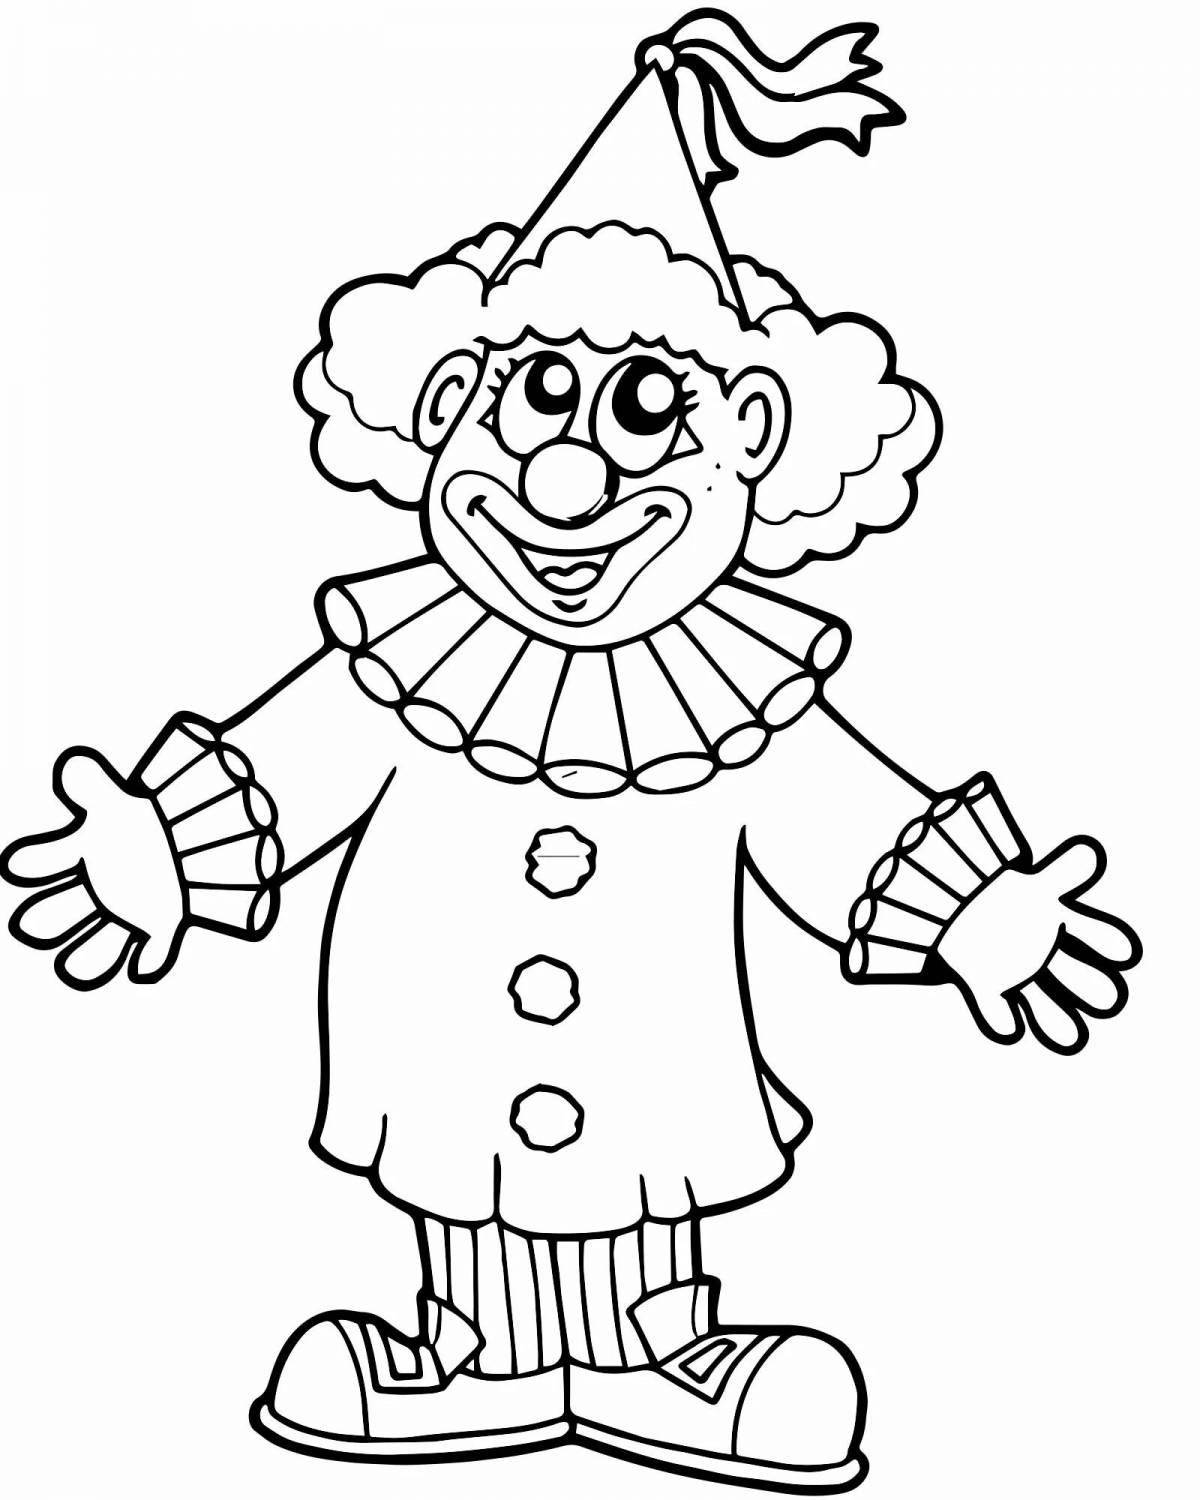 Adorable clown drawing for kids